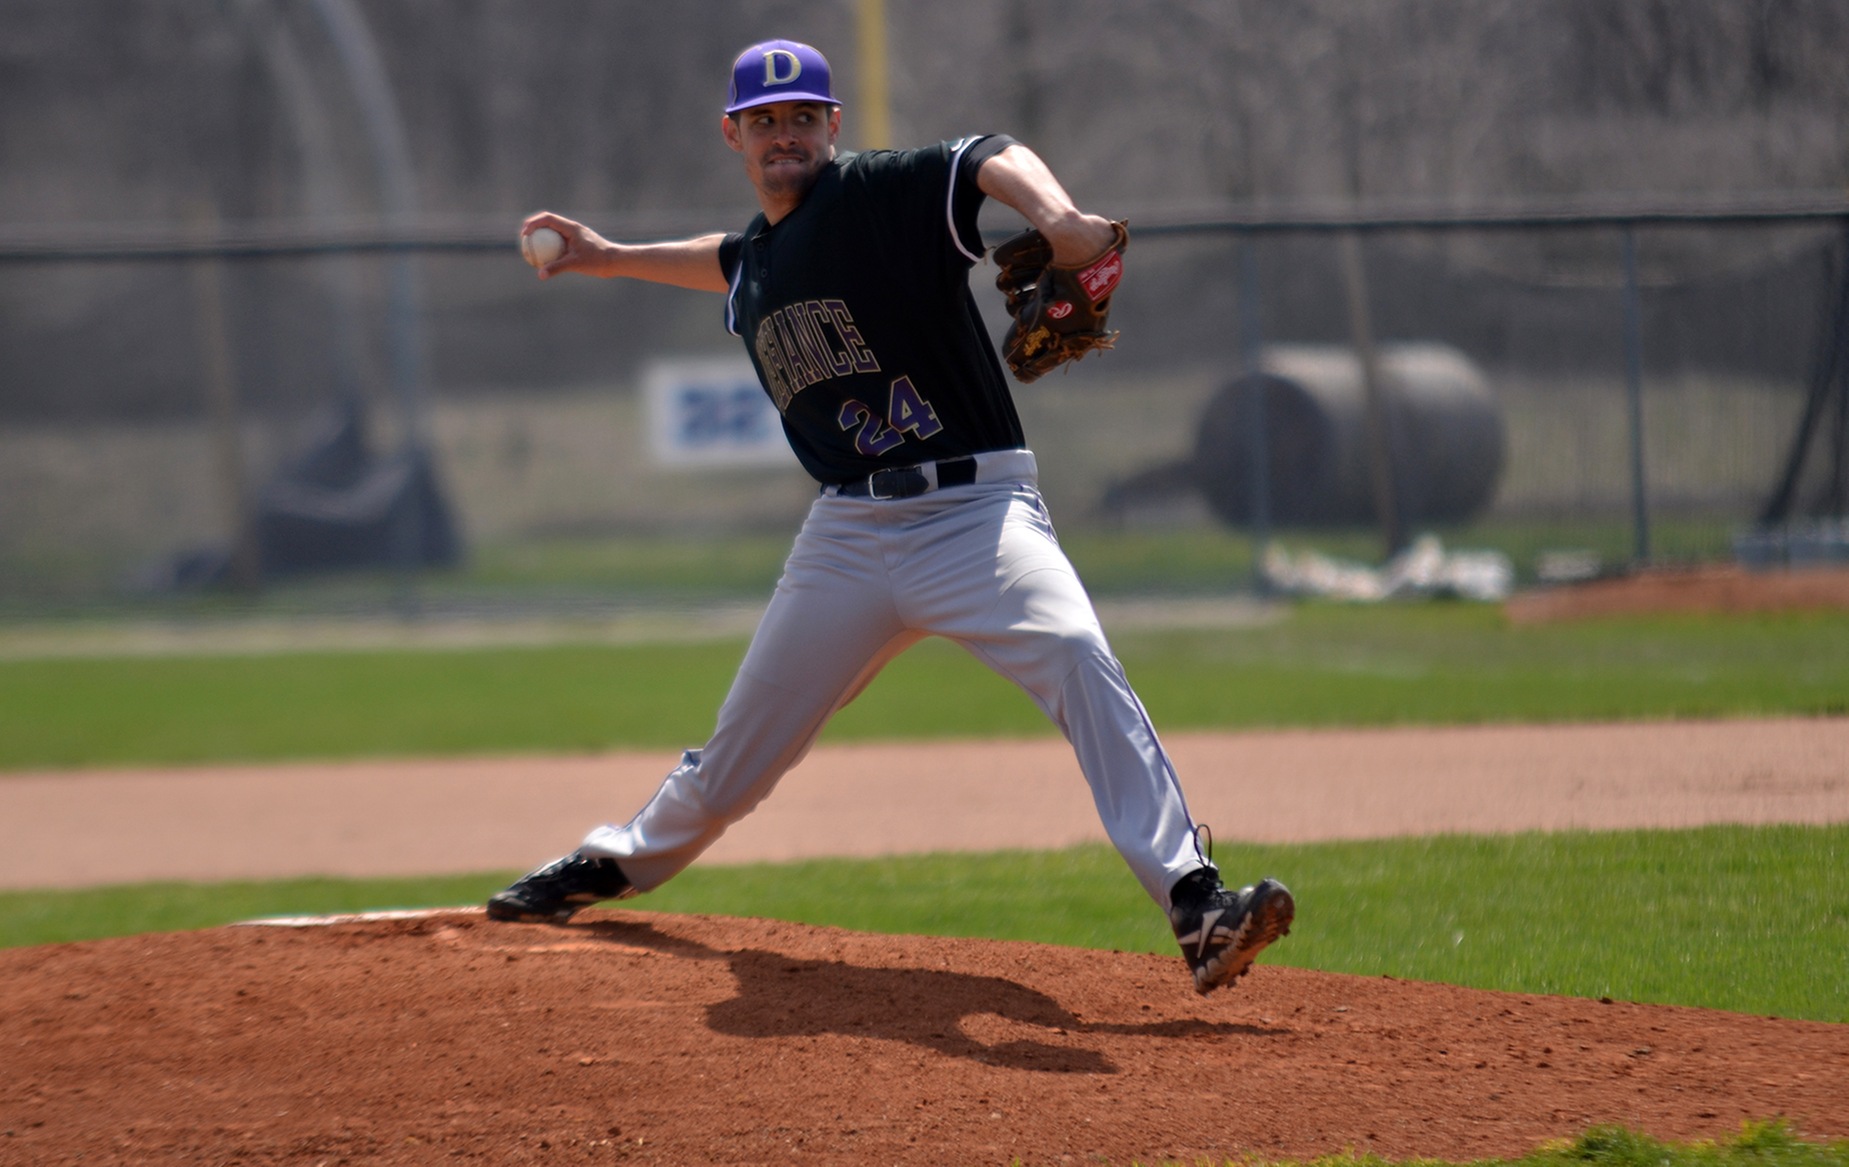 McLaughlin’s Pitching Seals Series Sweep of Quakers